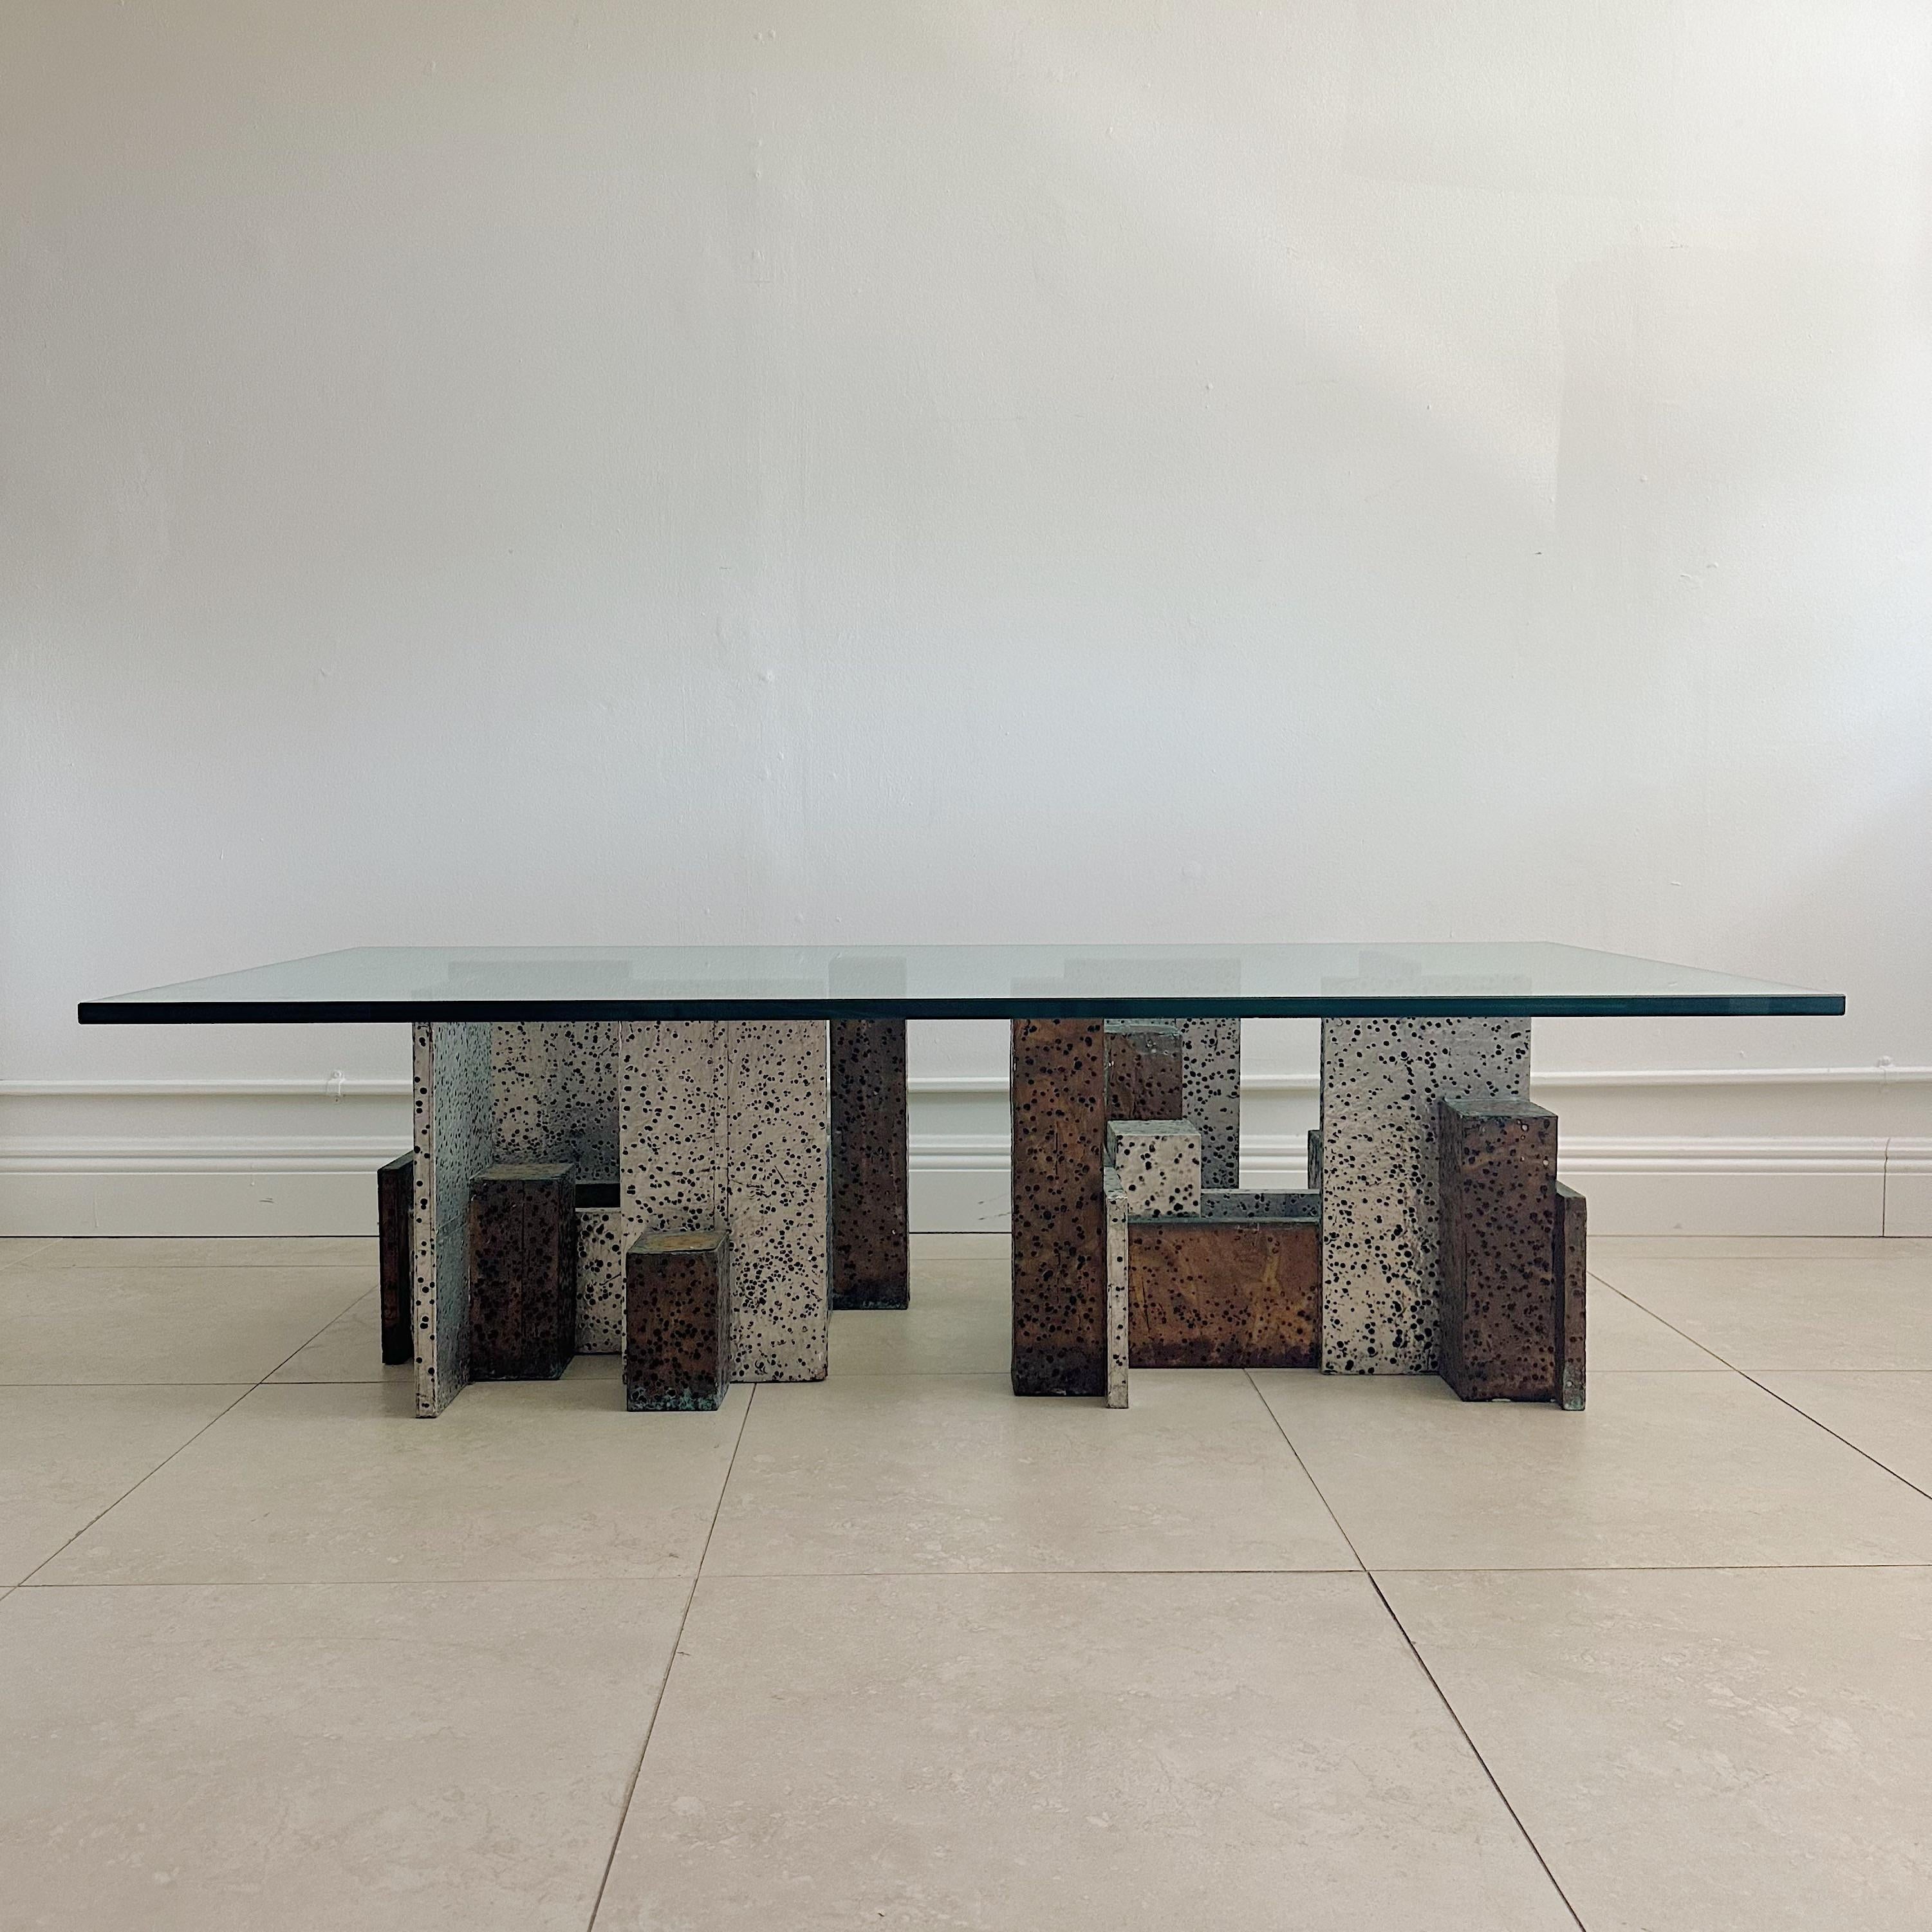 1970s coffee table: Skyscraper style, dual pedestals made of copper and aluminum , metal-clad wood with scraffito brutalist design. Arenson Studios, a collaboration by Marvin and Richard Arenson, crafted art furniture in West Palm Beach, Florida,